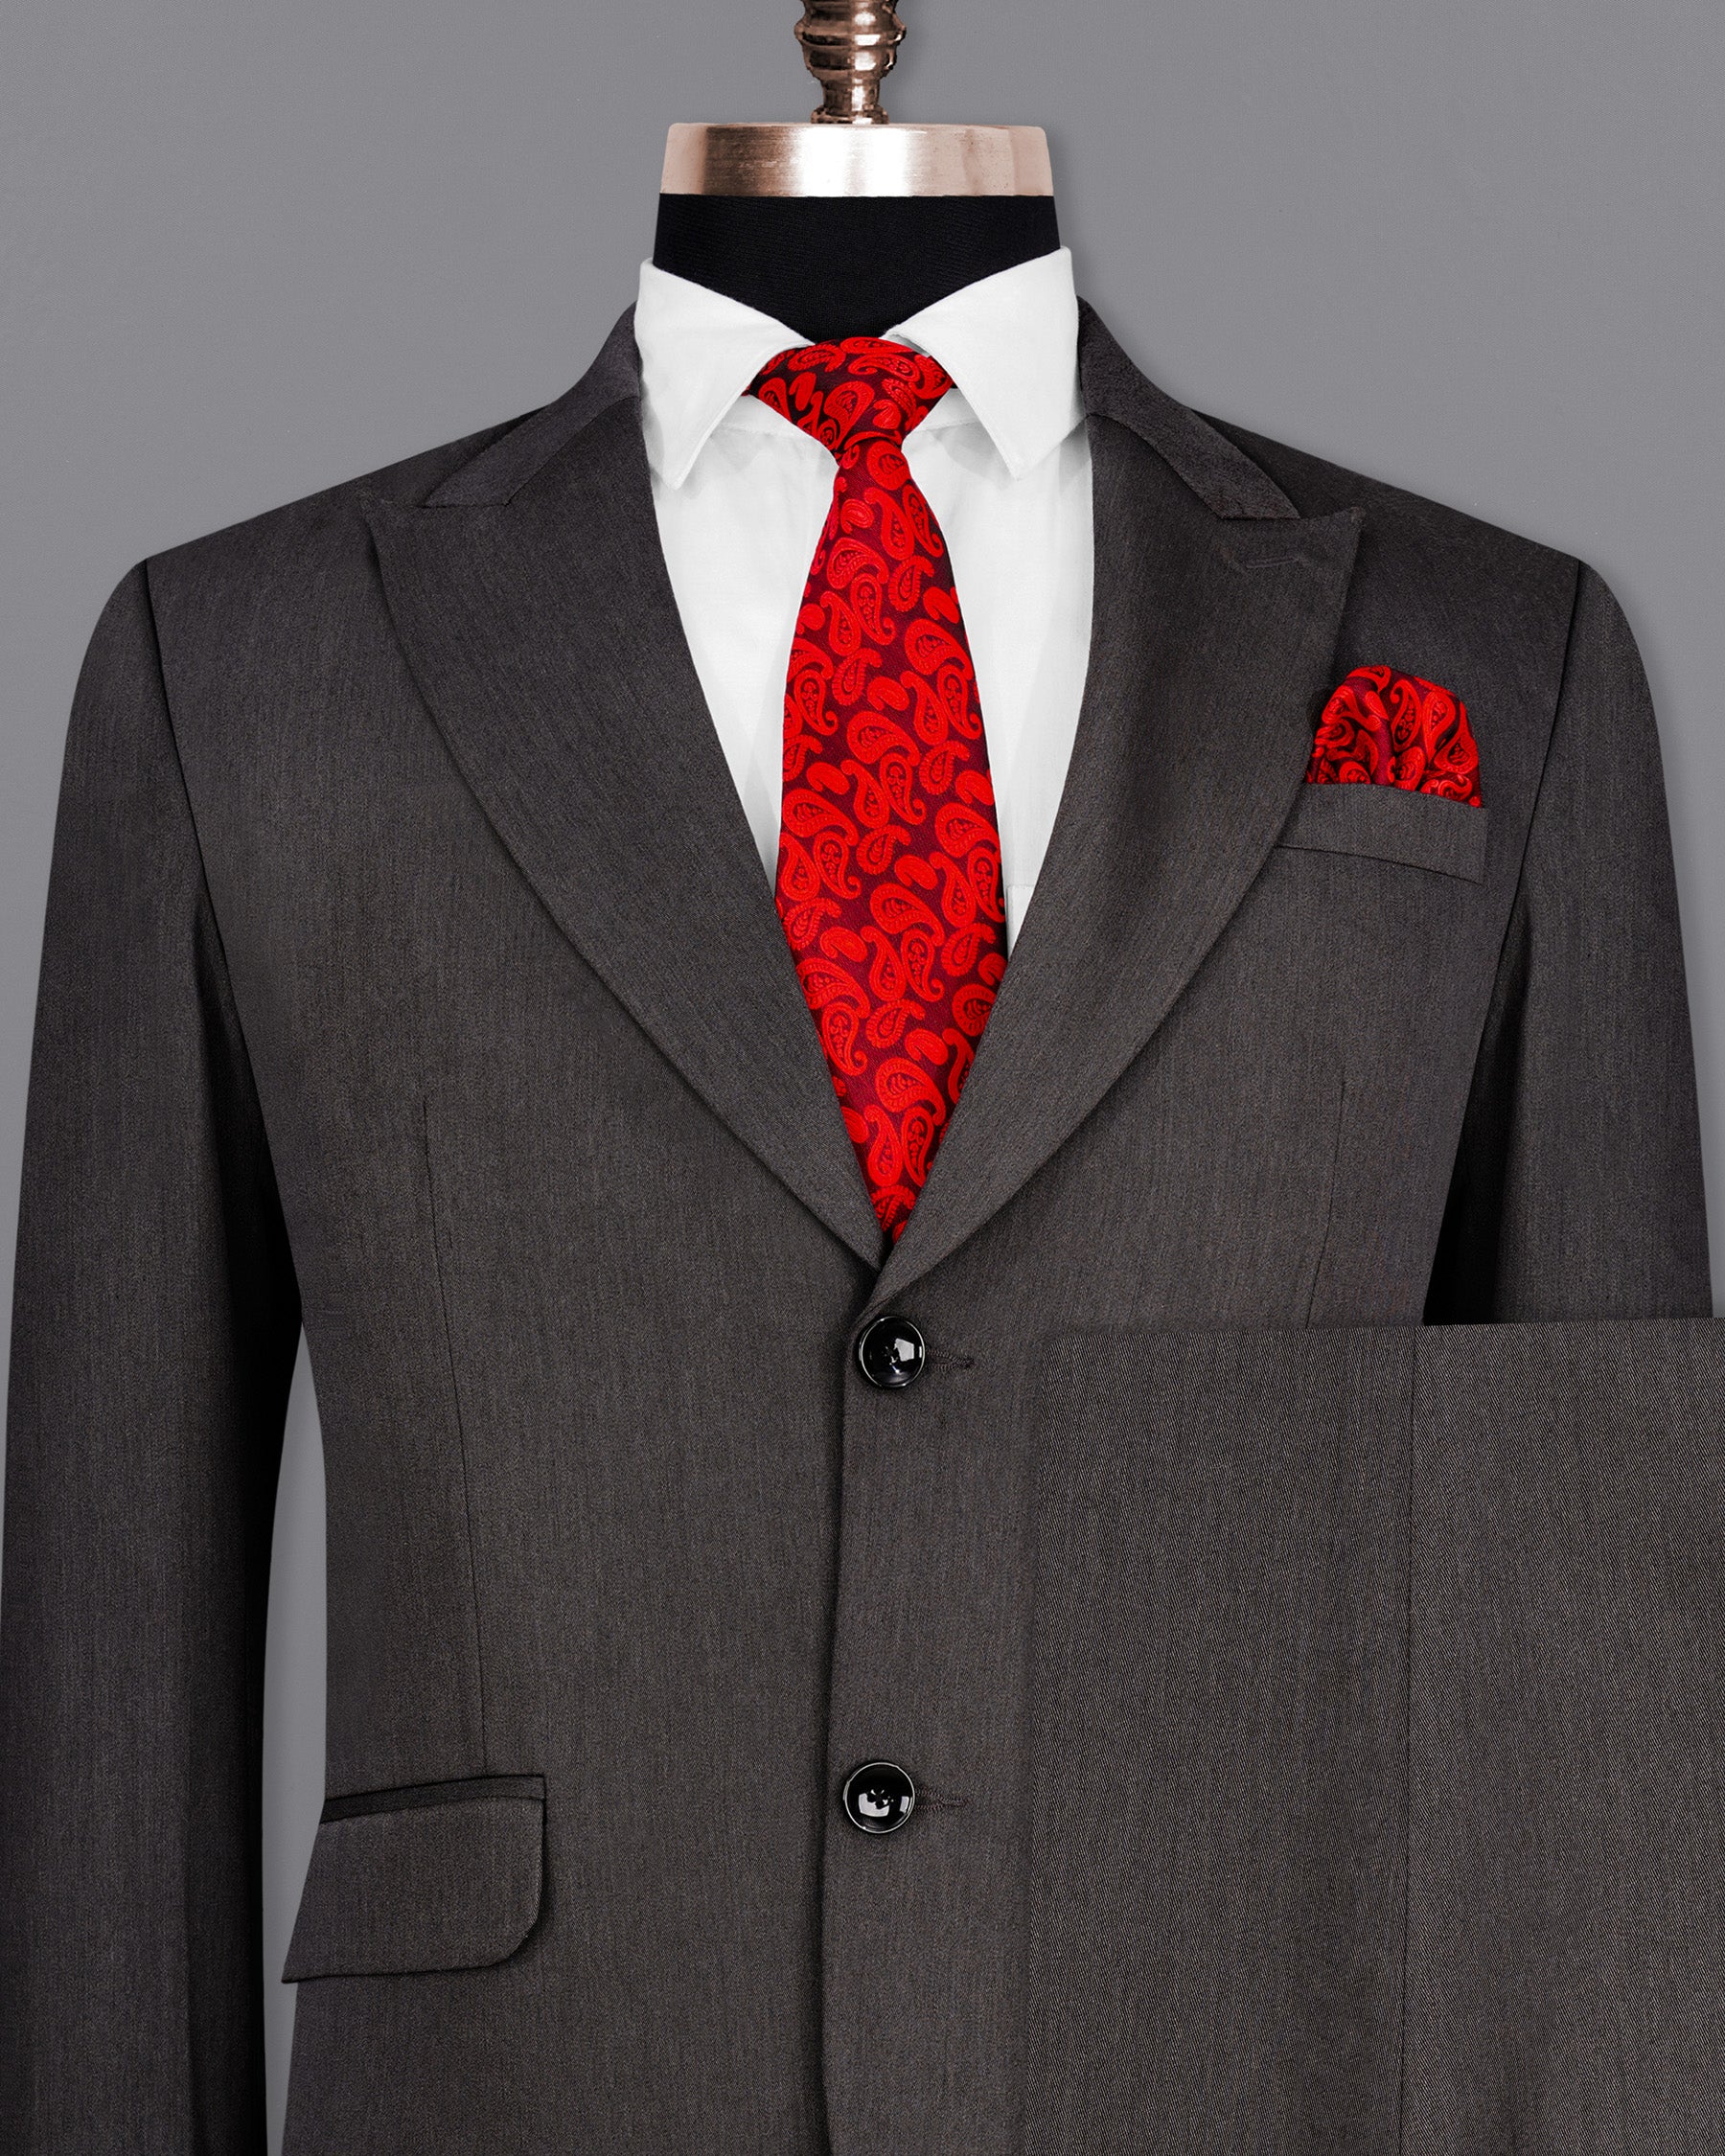 Thunder Steel Gray Single Breasted Suit